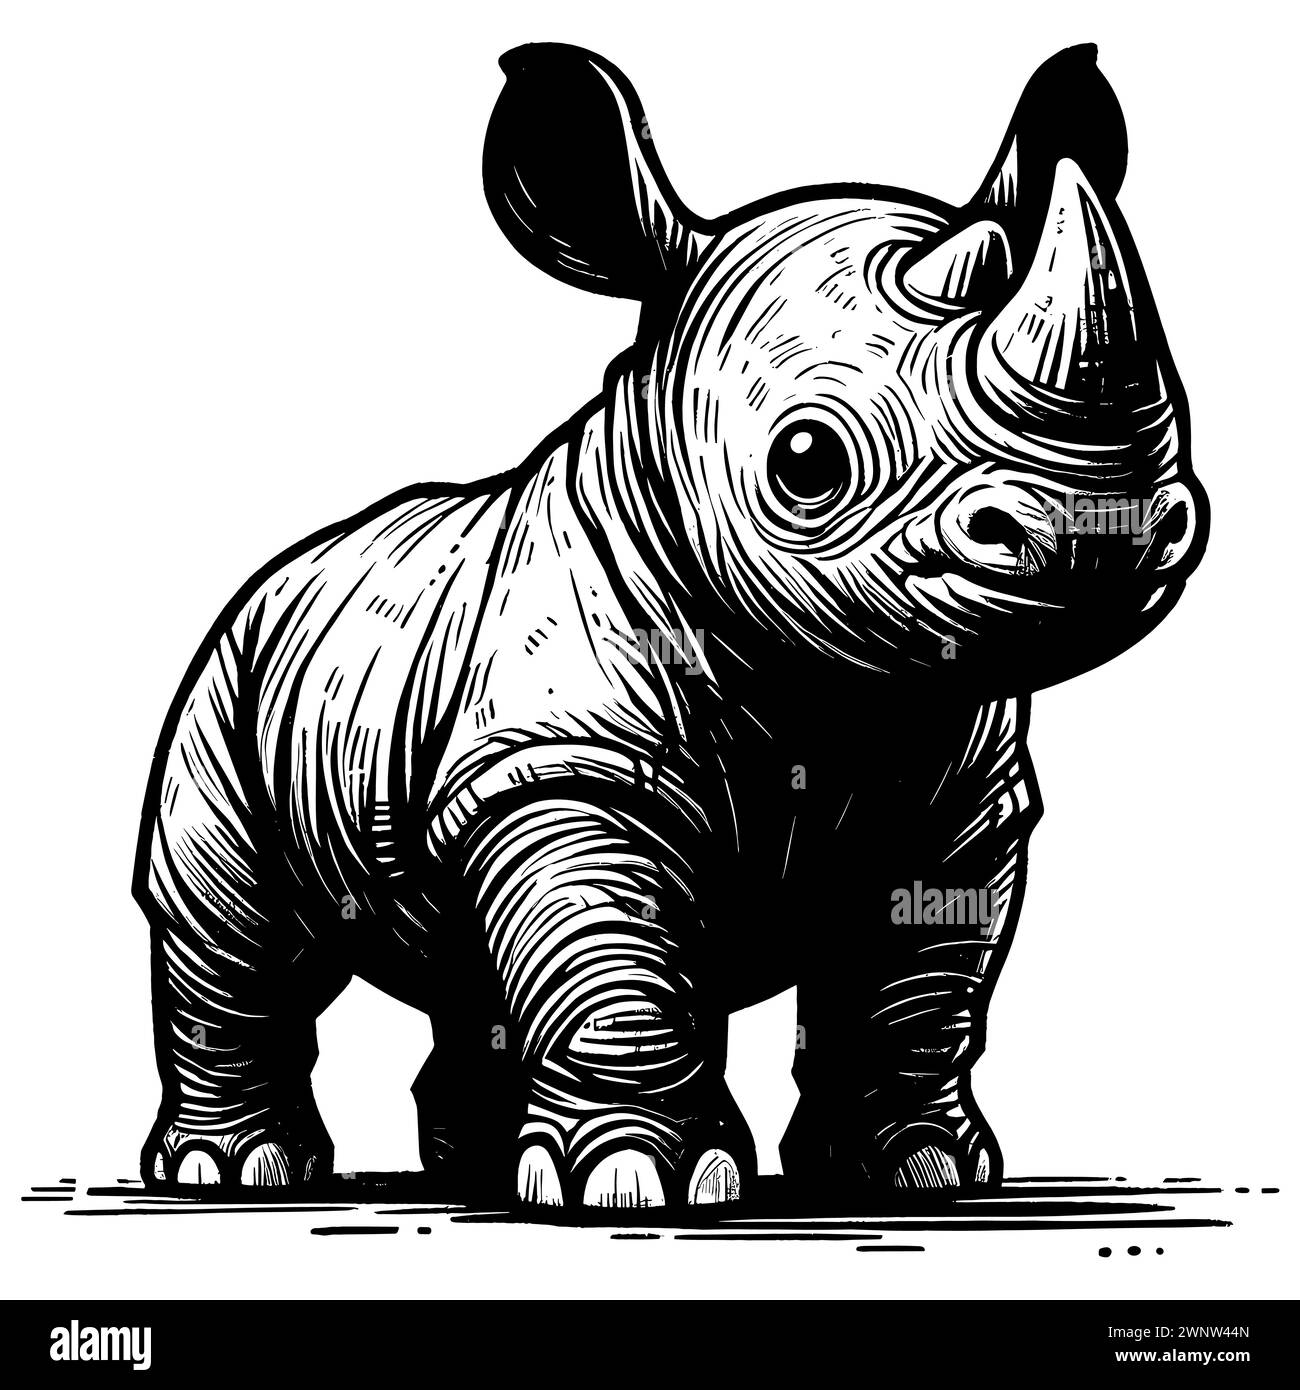 Woodcut style illustration of cute baby rhinoceros on white background. Stock Vector